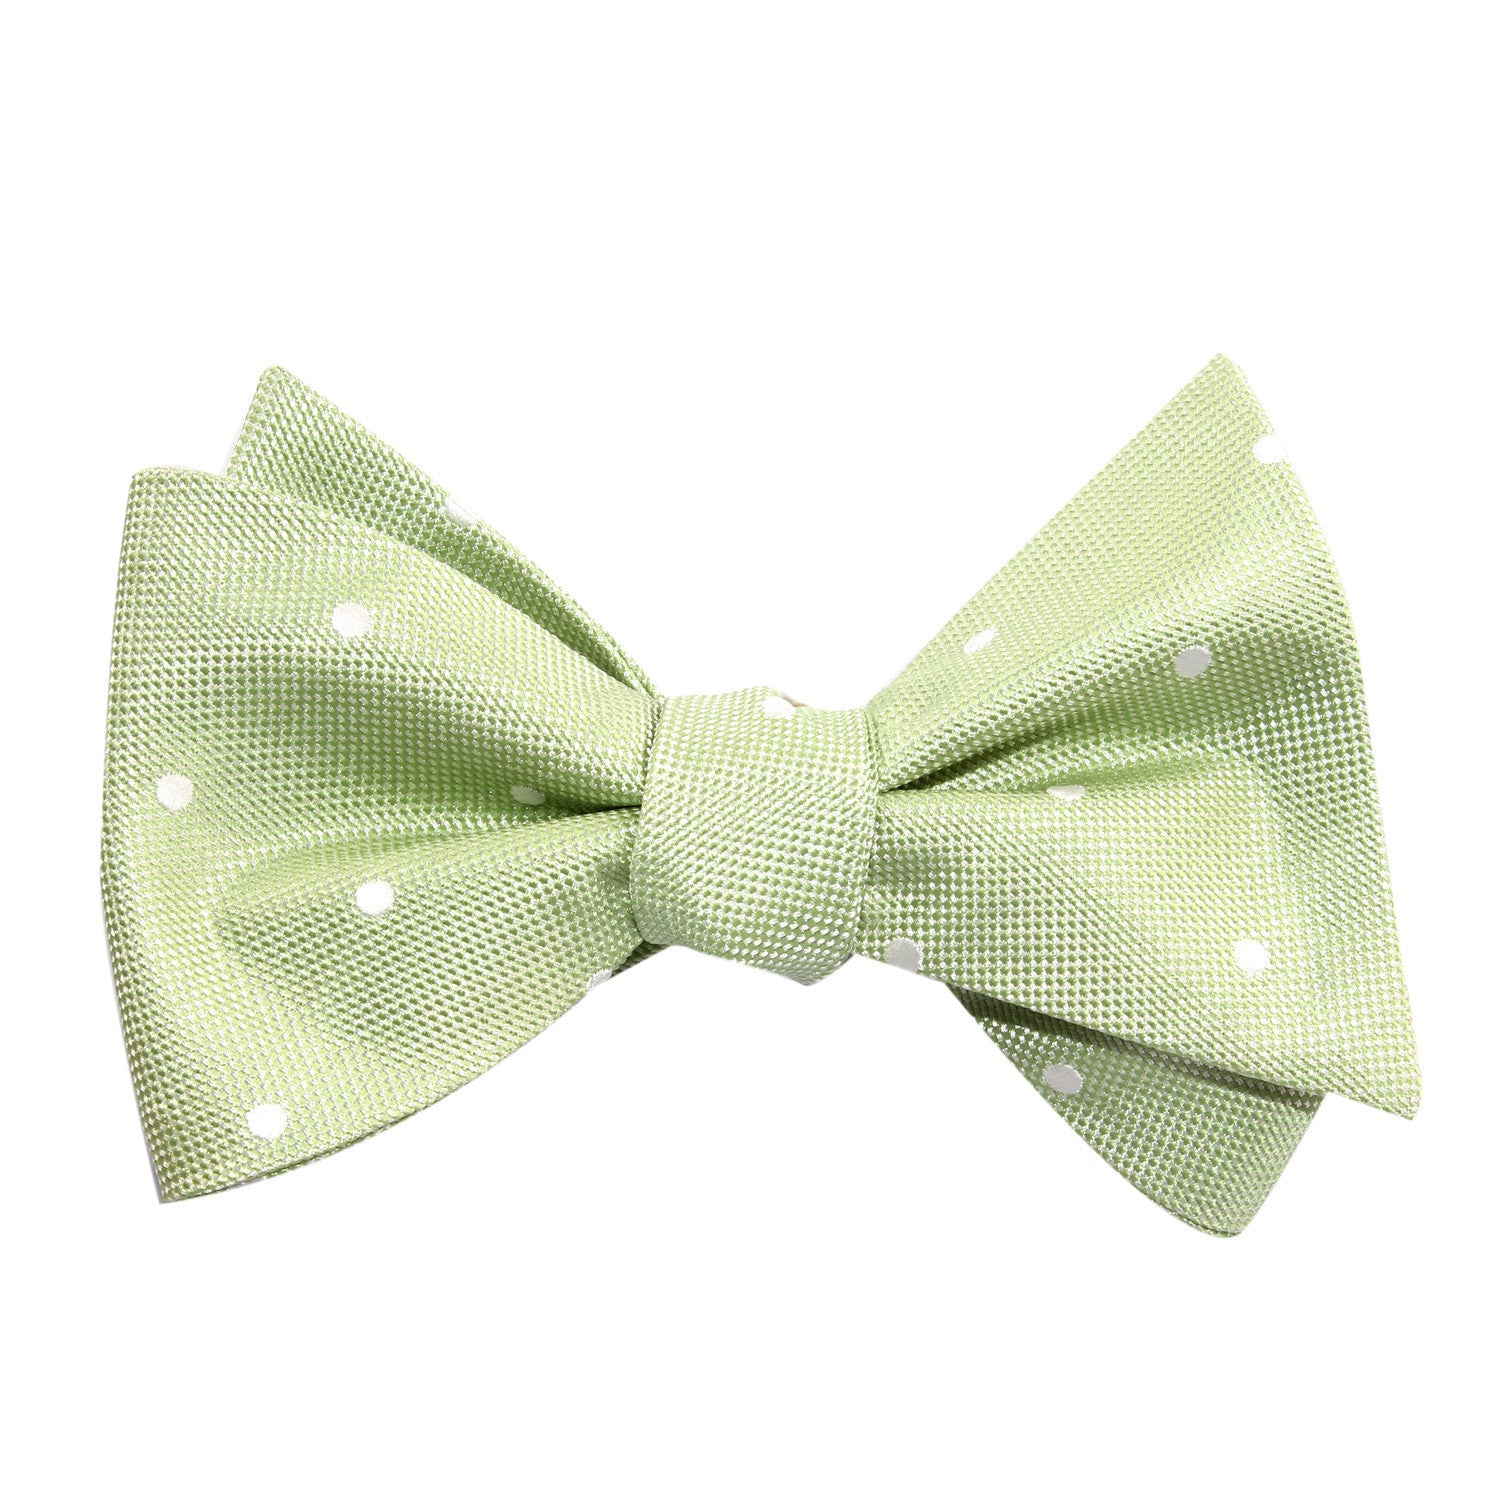 Light Mint Pistachio Green with White Polka Dots Self Tie Bow Tie 2